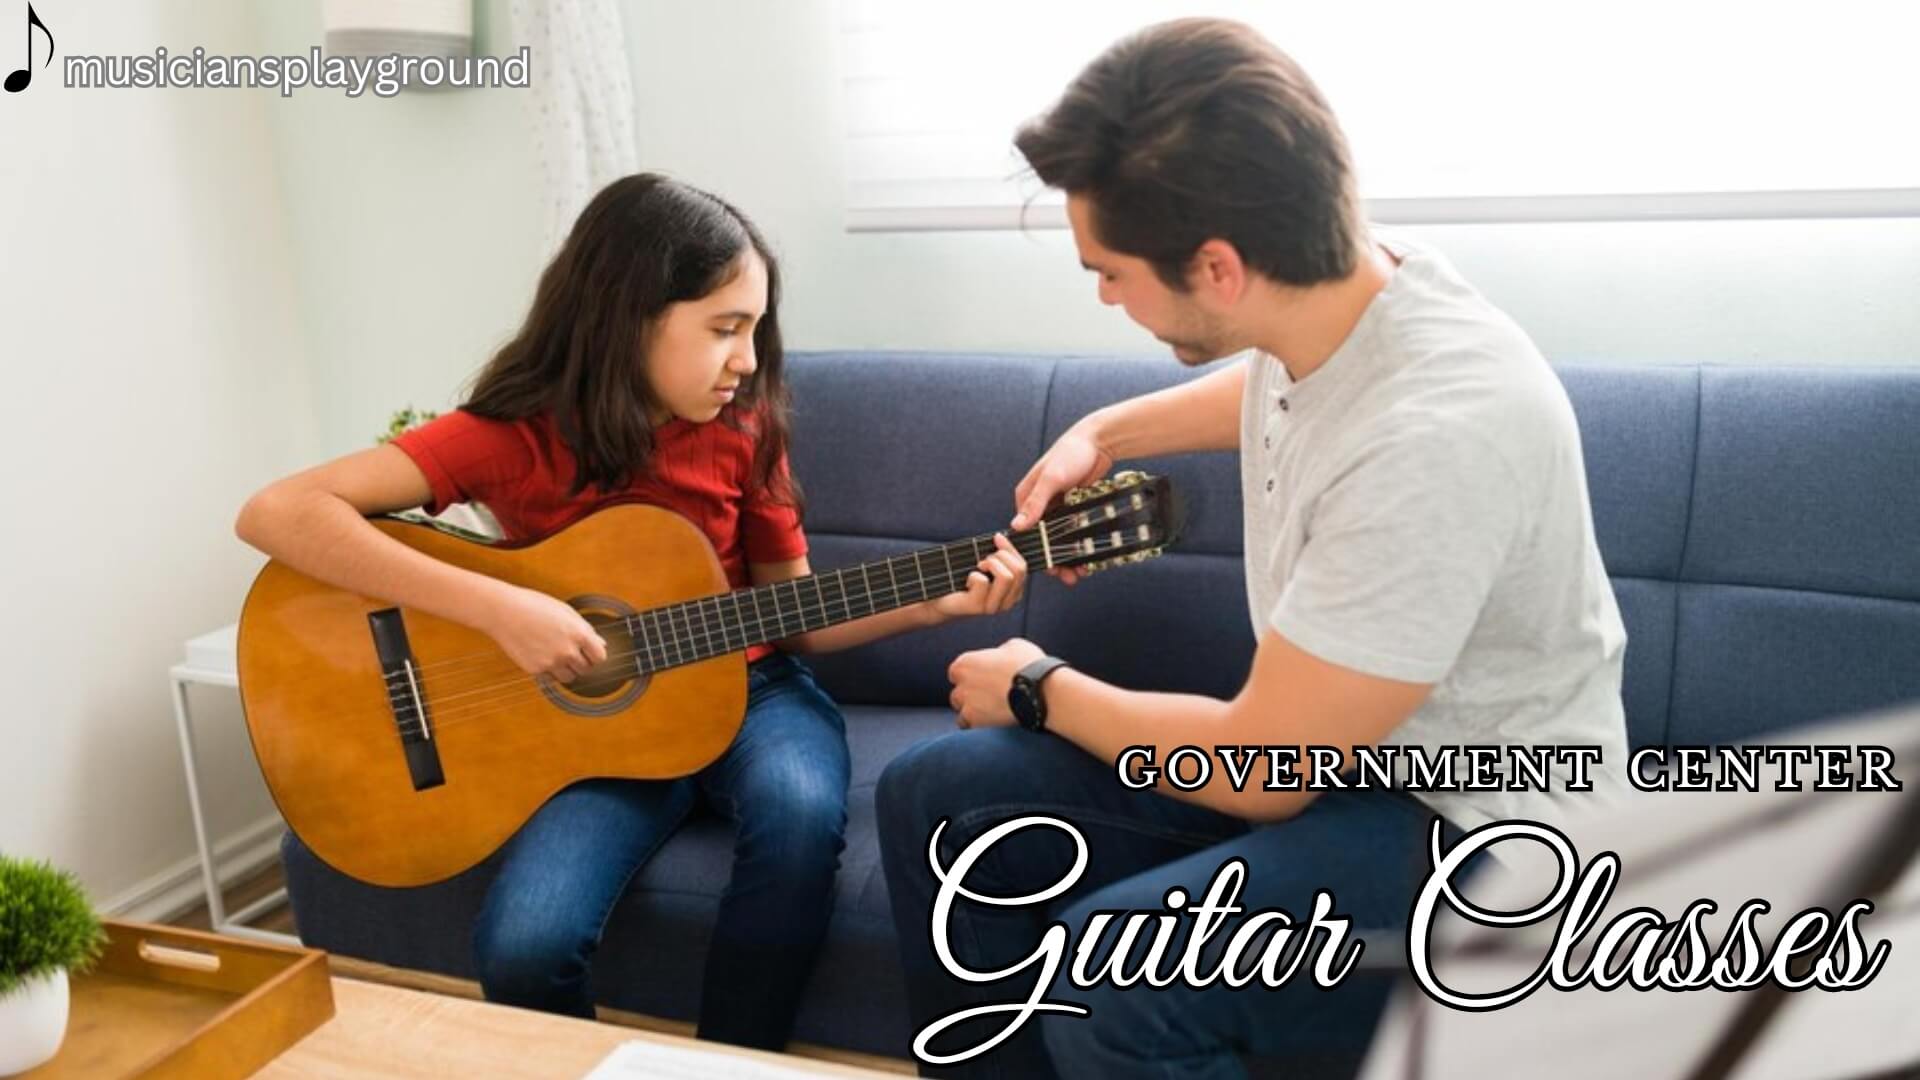 Welcome to Musicians Playground: Guitar Classes in Government Center, Massachusetts